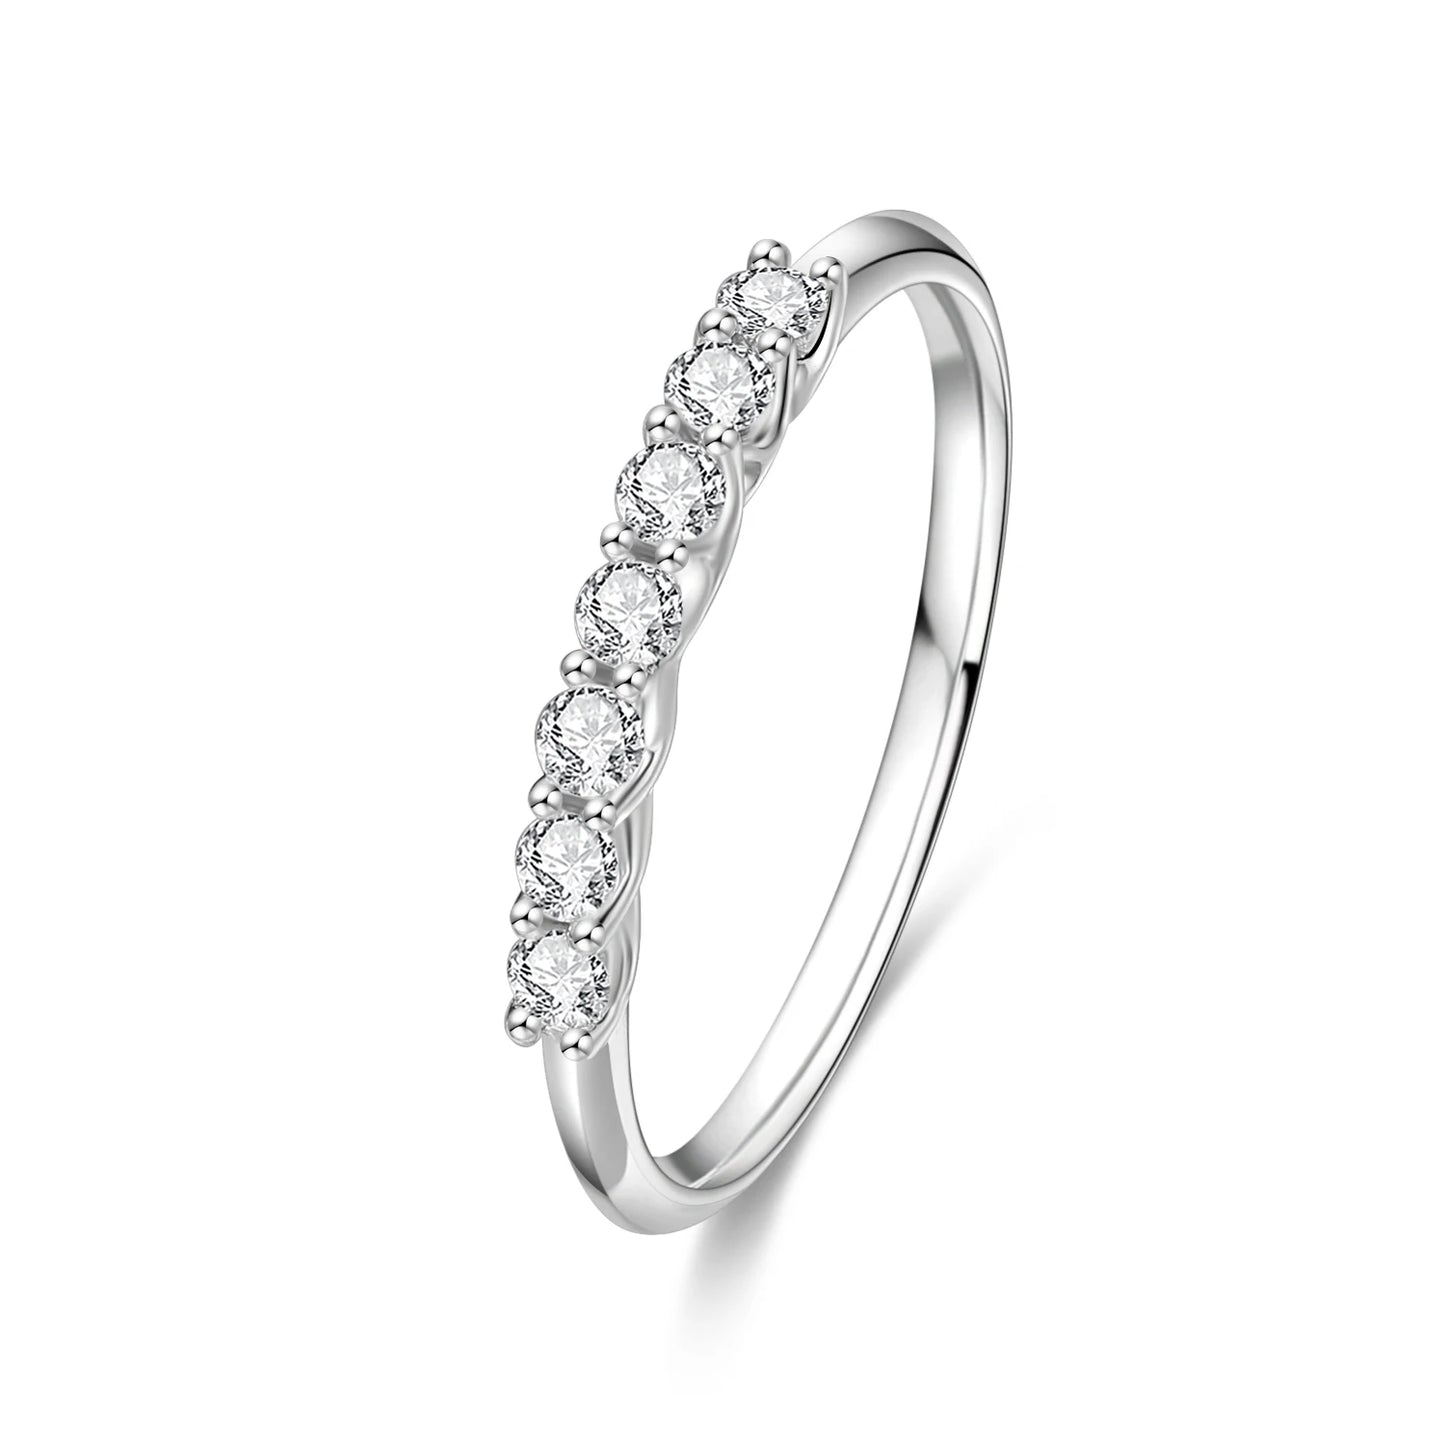 0.21ct Diamond Ring in 18K Solid White Gold